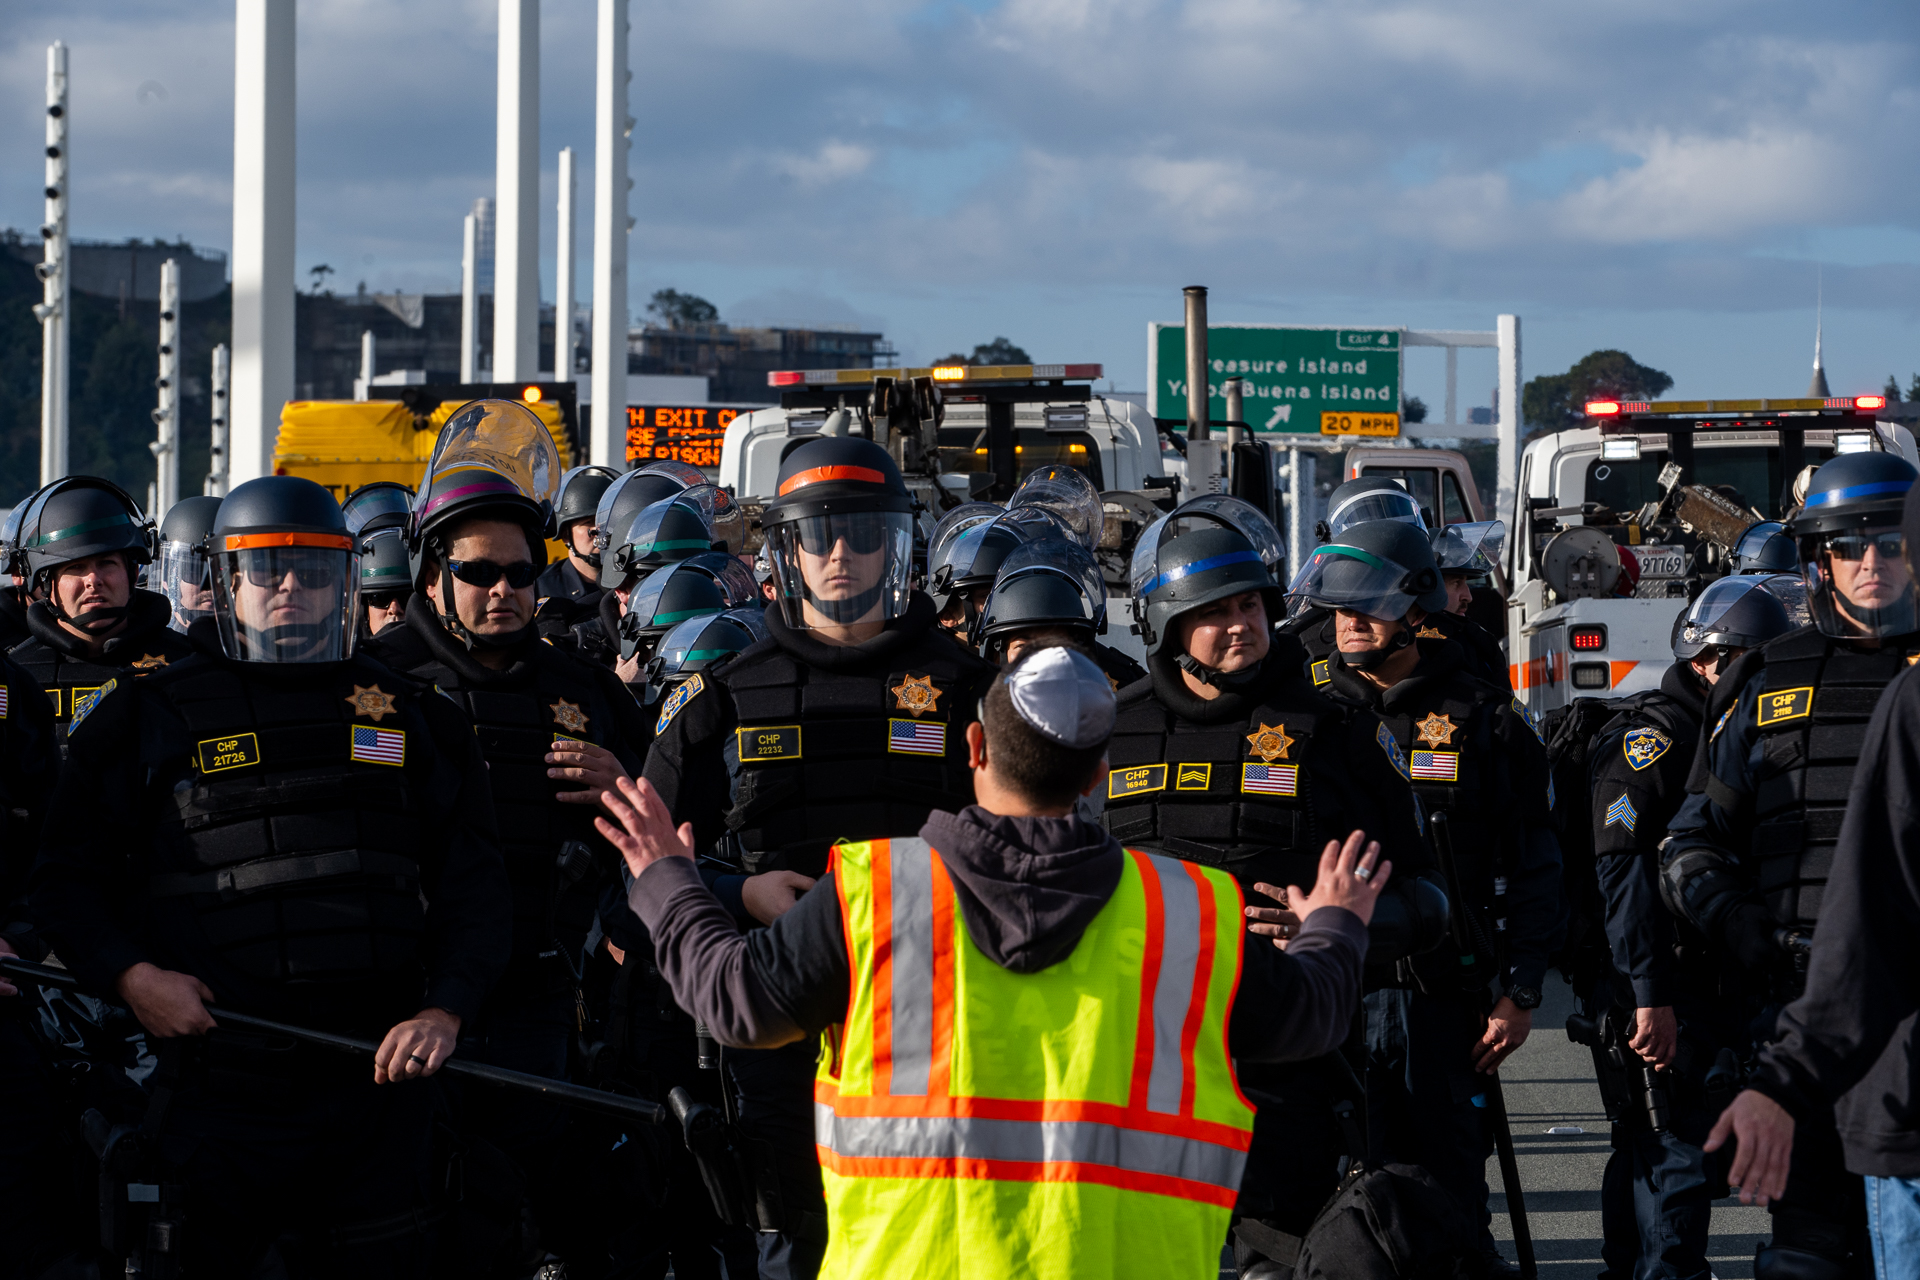 A person raises their arms wearing a reflective vest with a line of police in front of them.